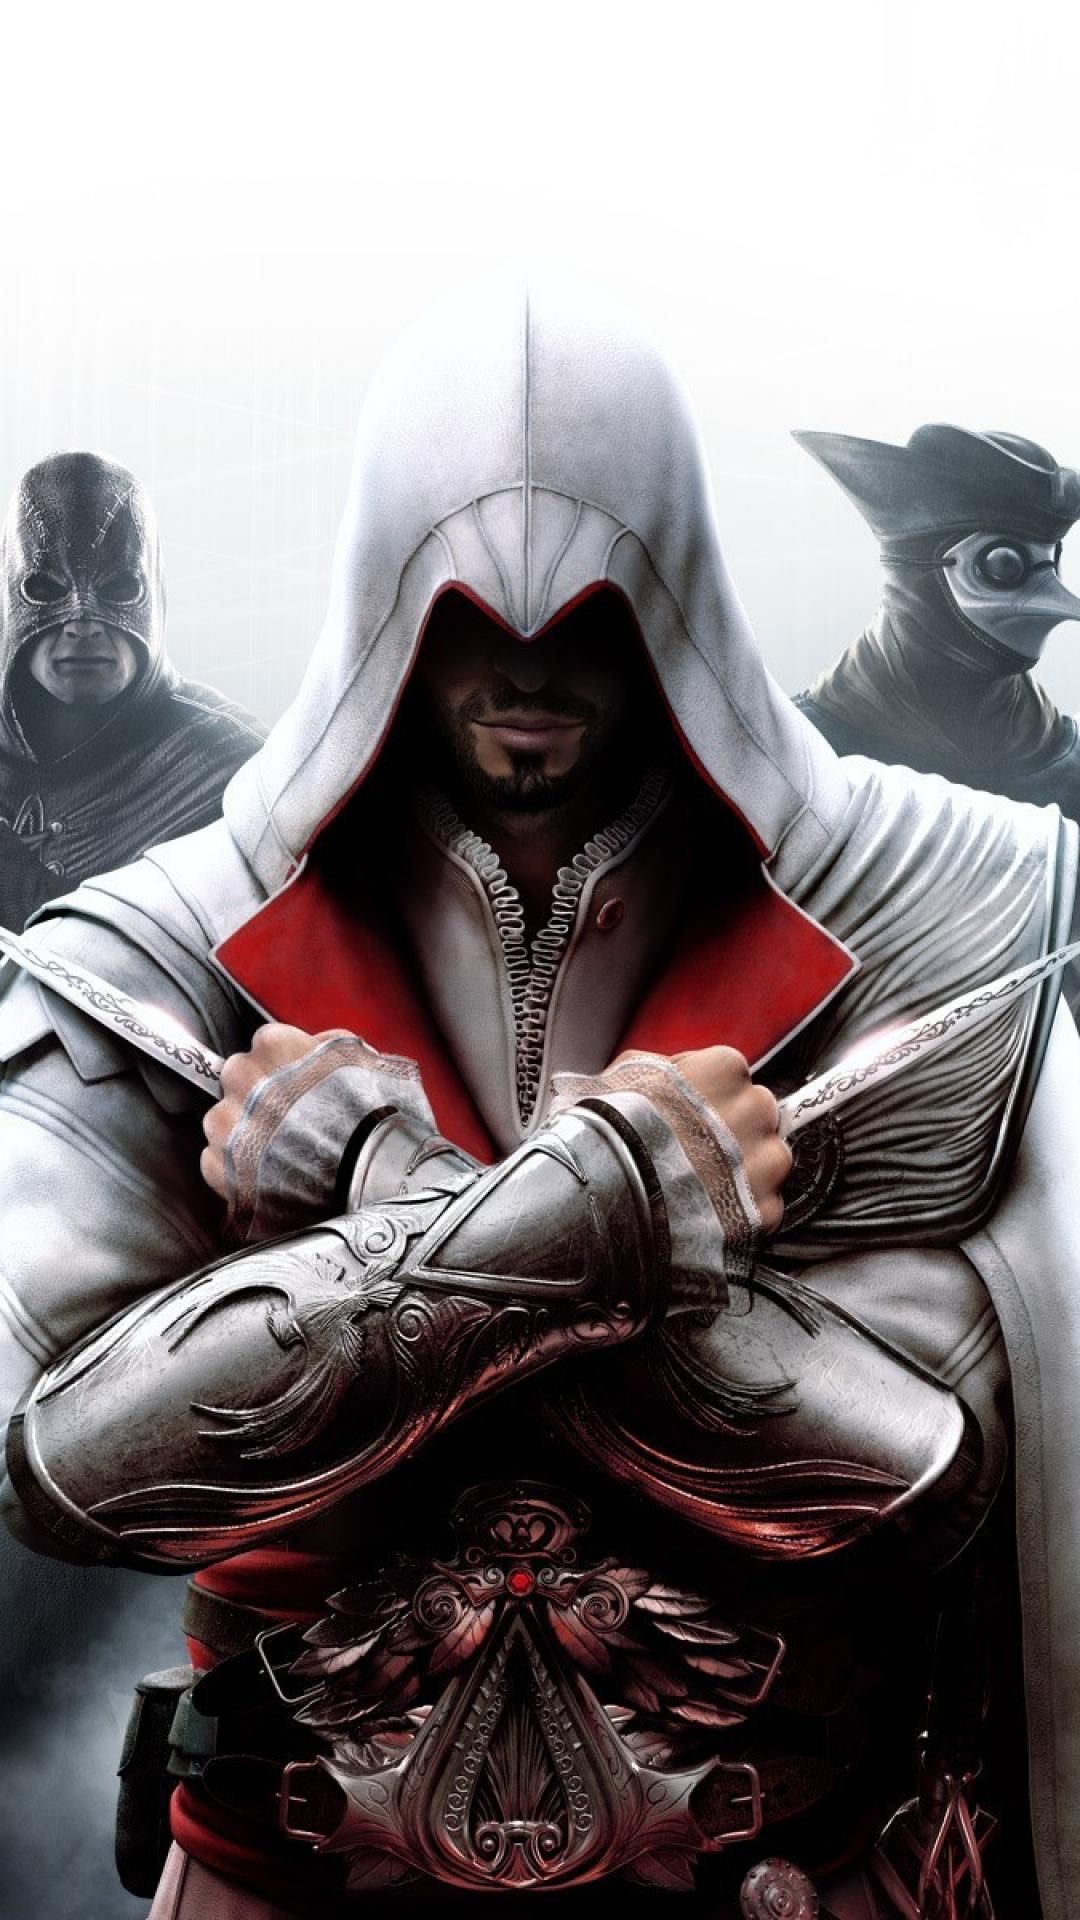 assassins creed for mobile wallpapers Wallpapers